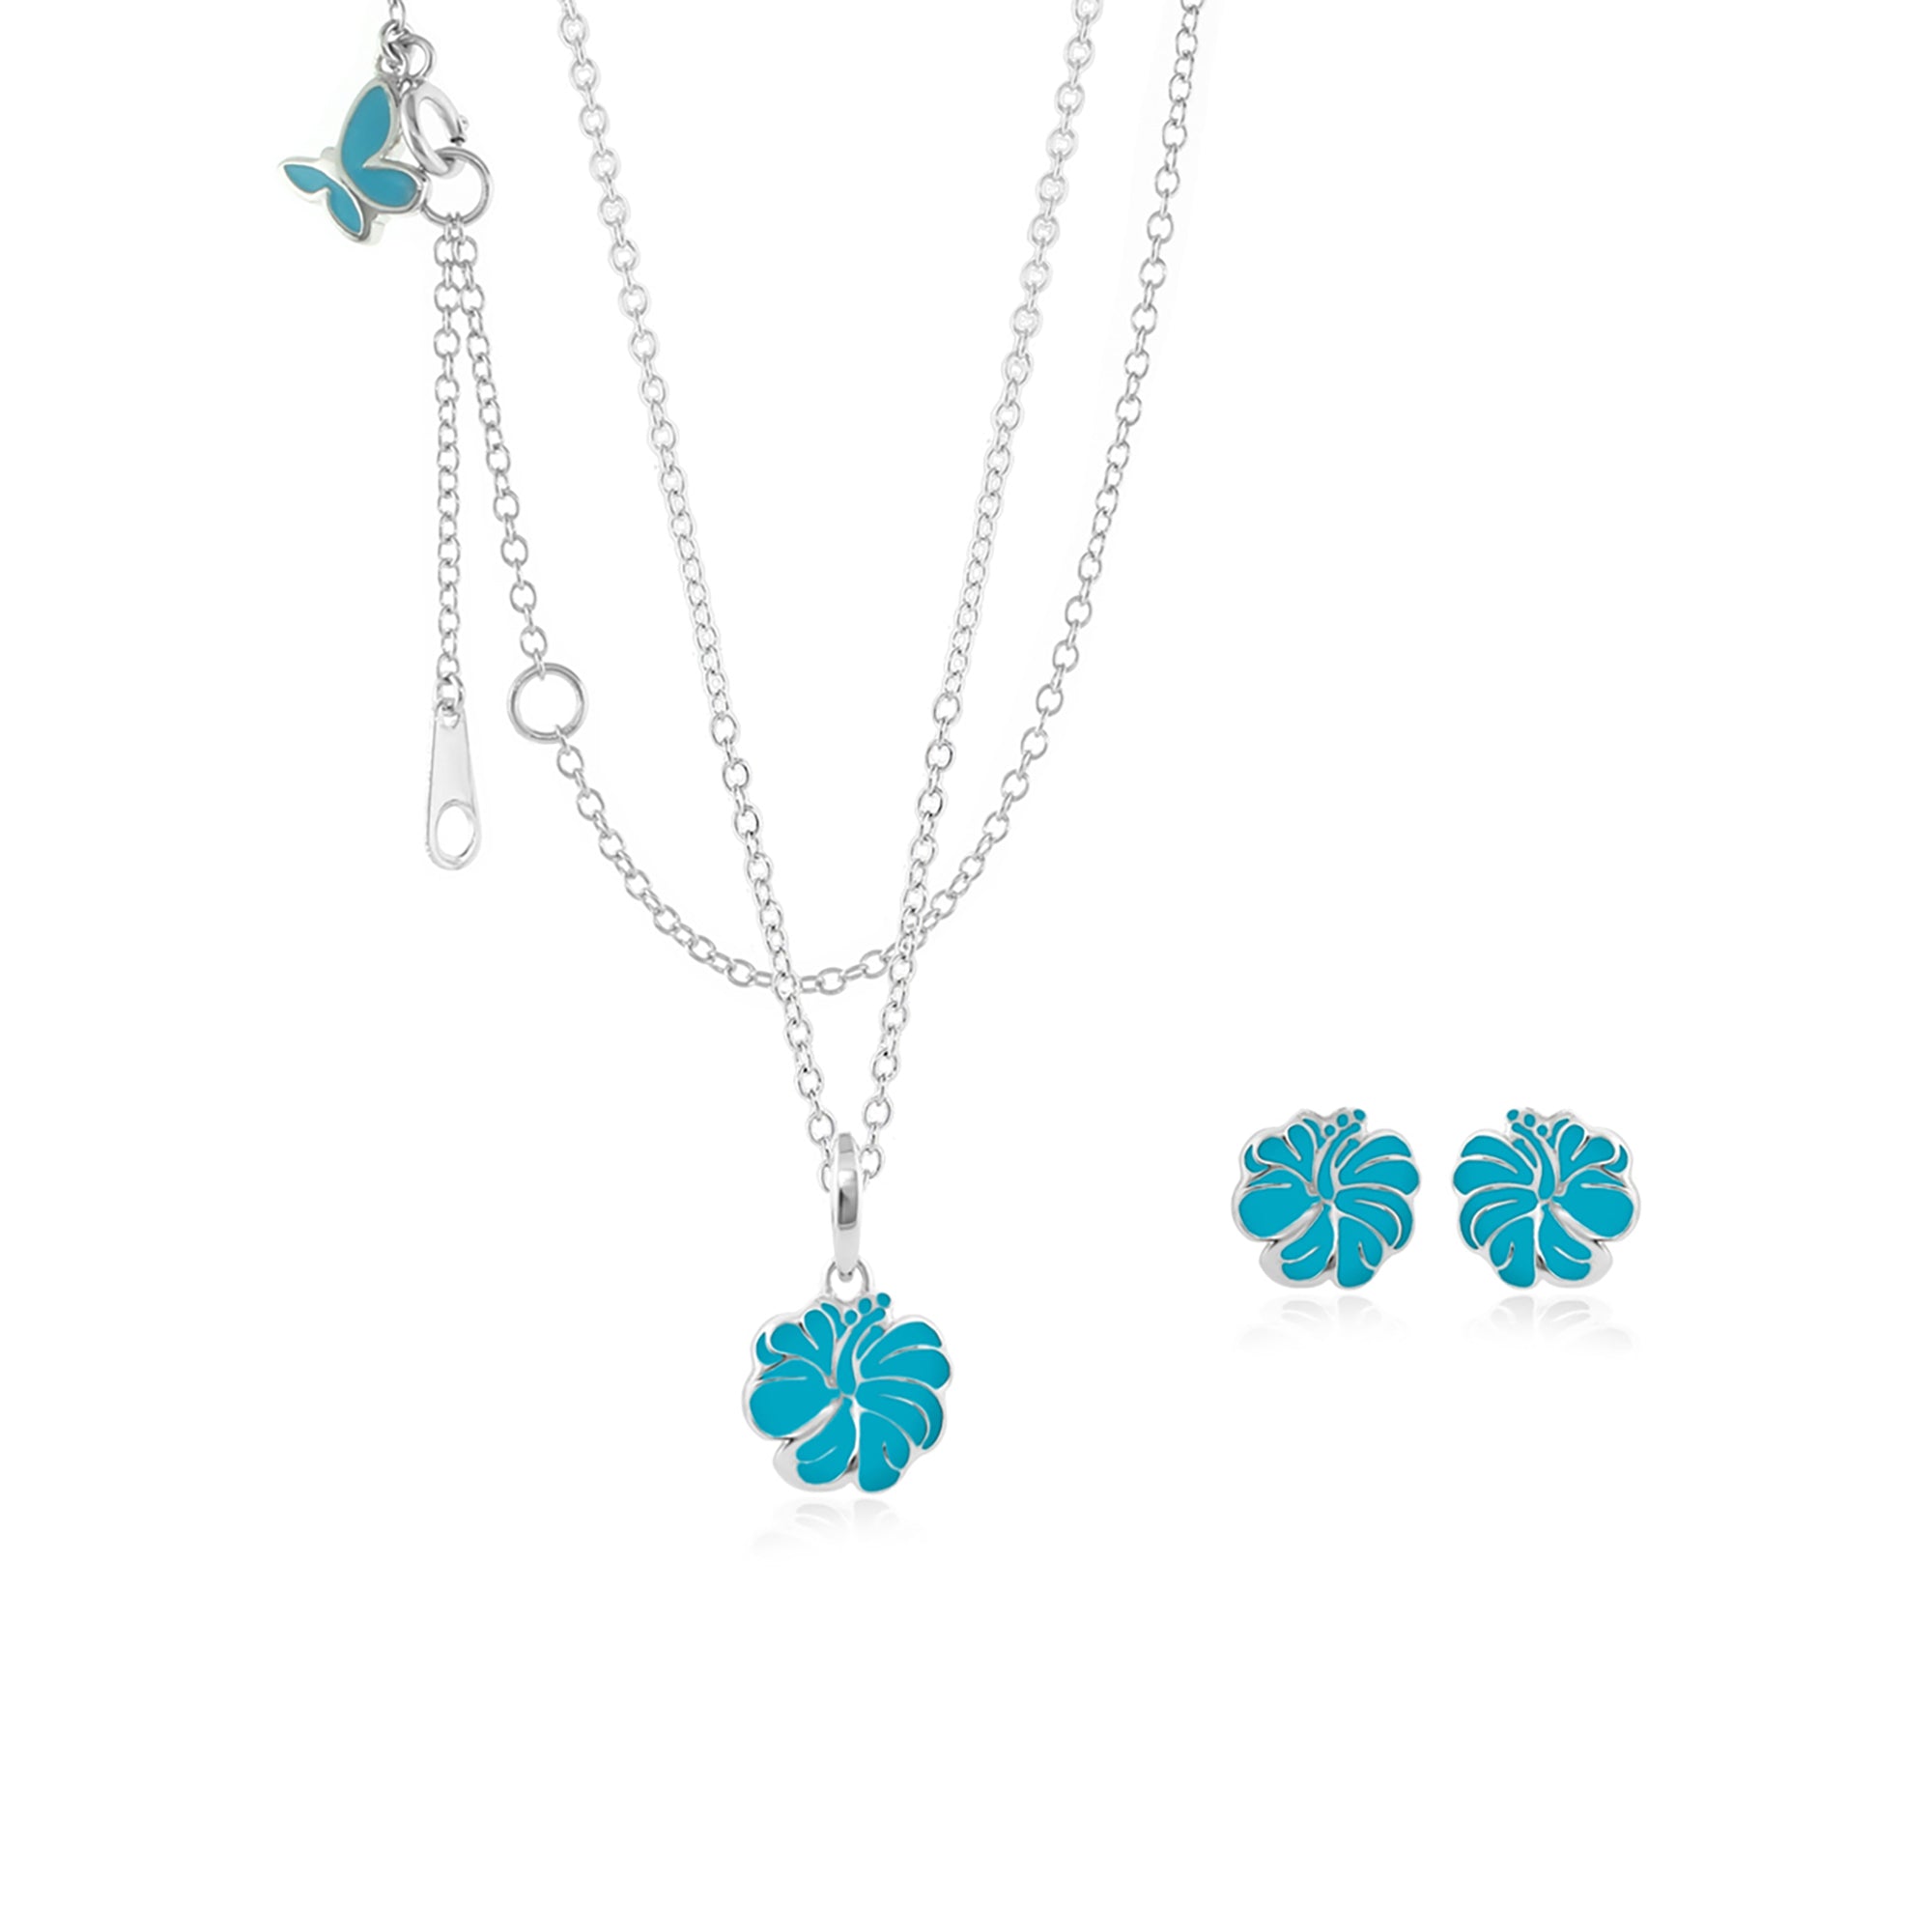 Sydney Leigh Hibiscus Flower Necklace & Earrings Set